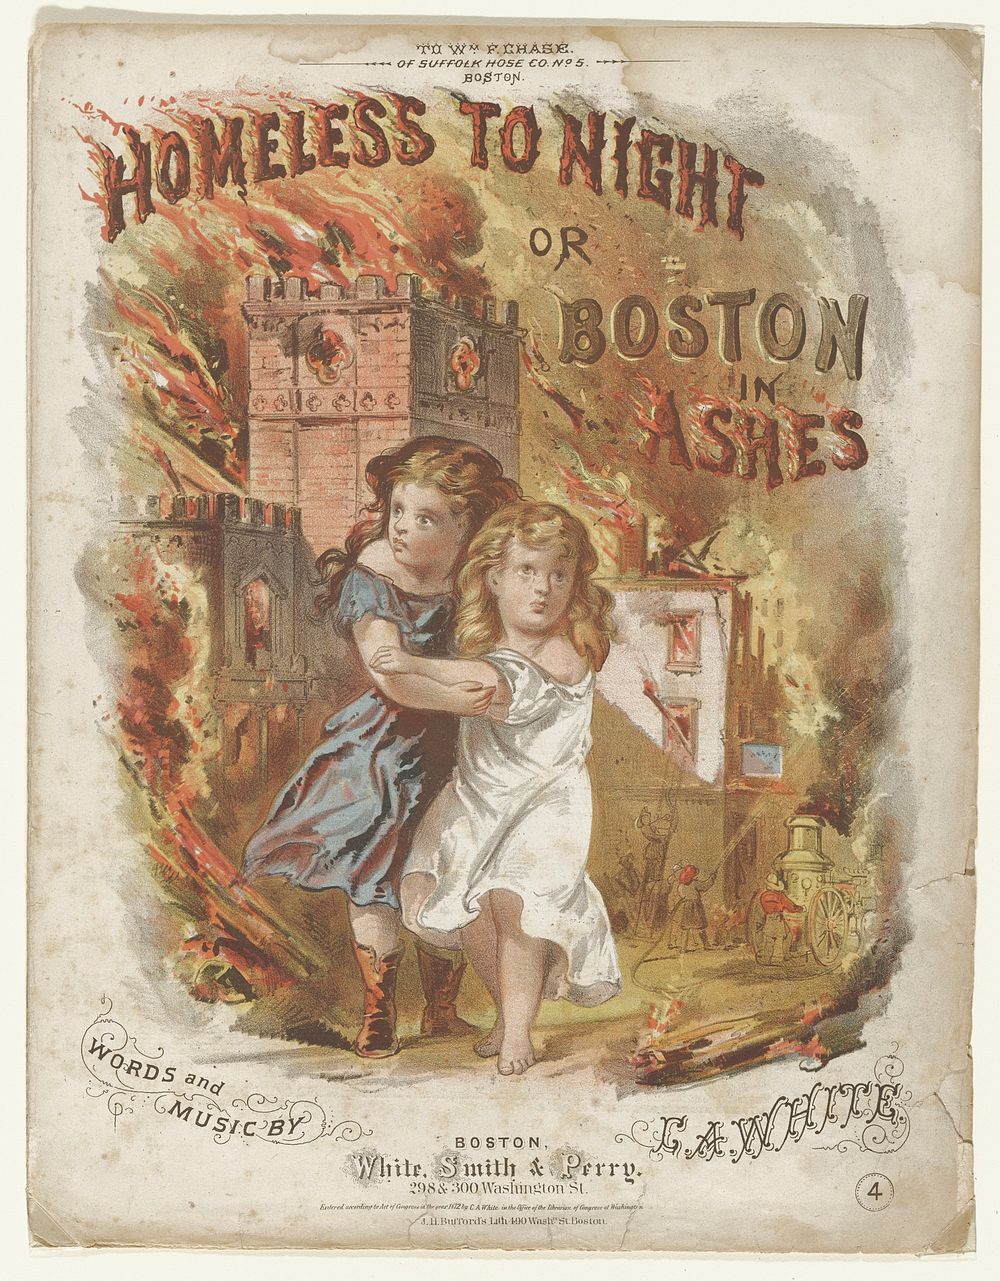 Illustrated sheet music cover. Two young children, the orphans of the song, clinging to each other. Behind them are a…